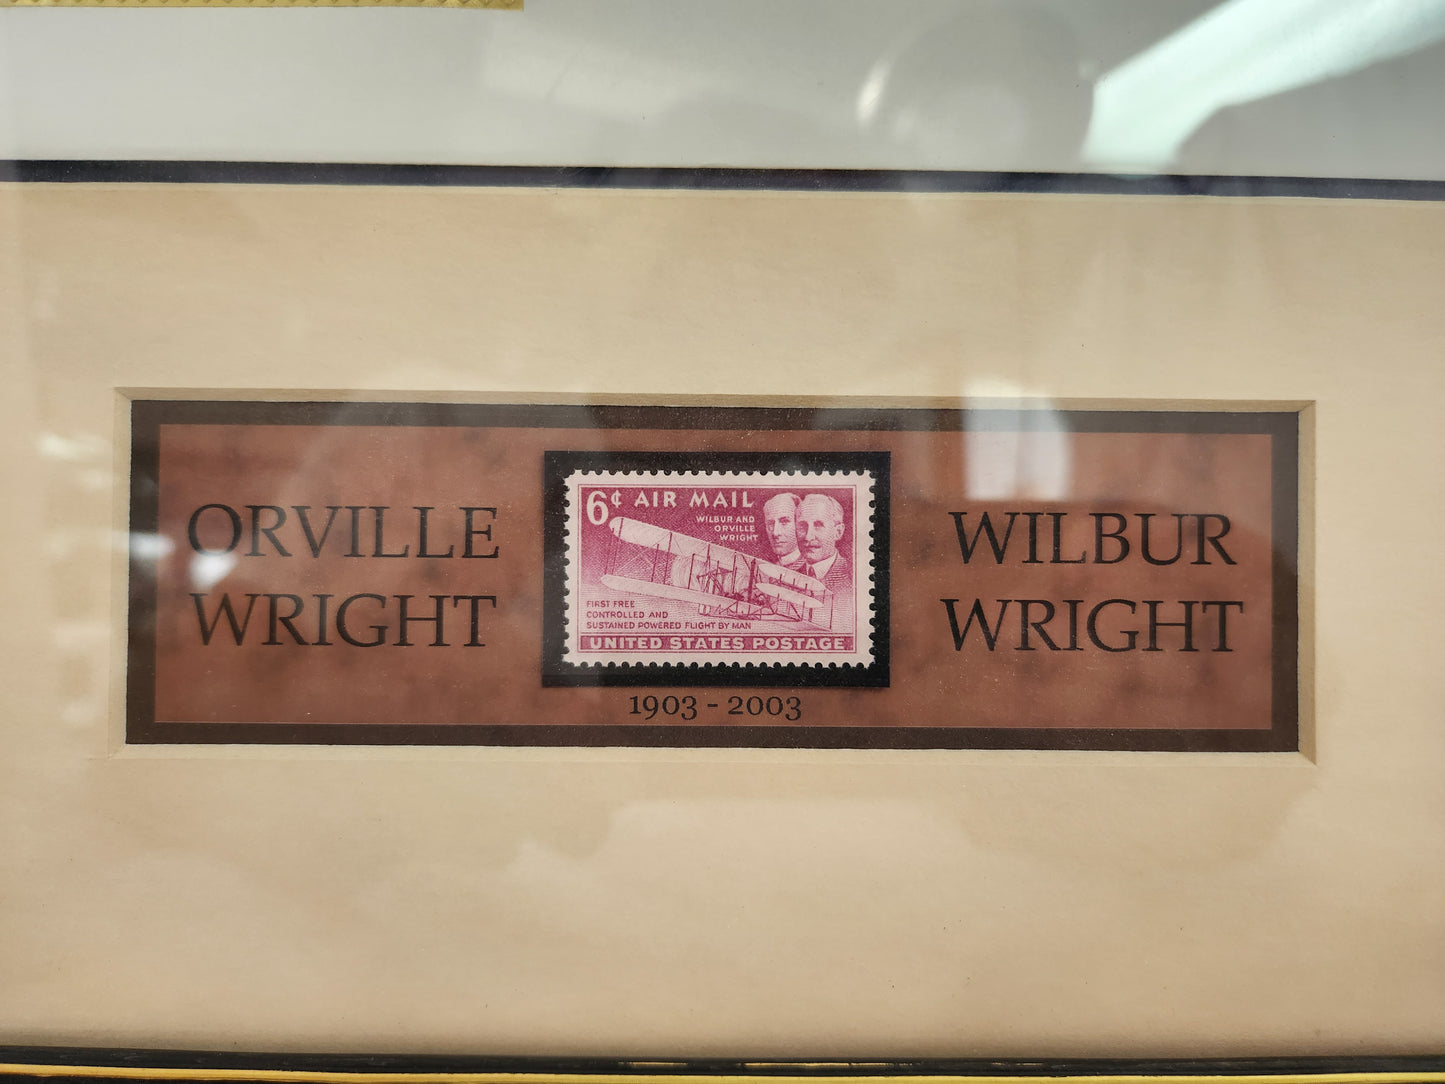 Wright Brothers Framed 100th Anniversary Envelope w/ Stamp & 6 Cent Airmail Stamp